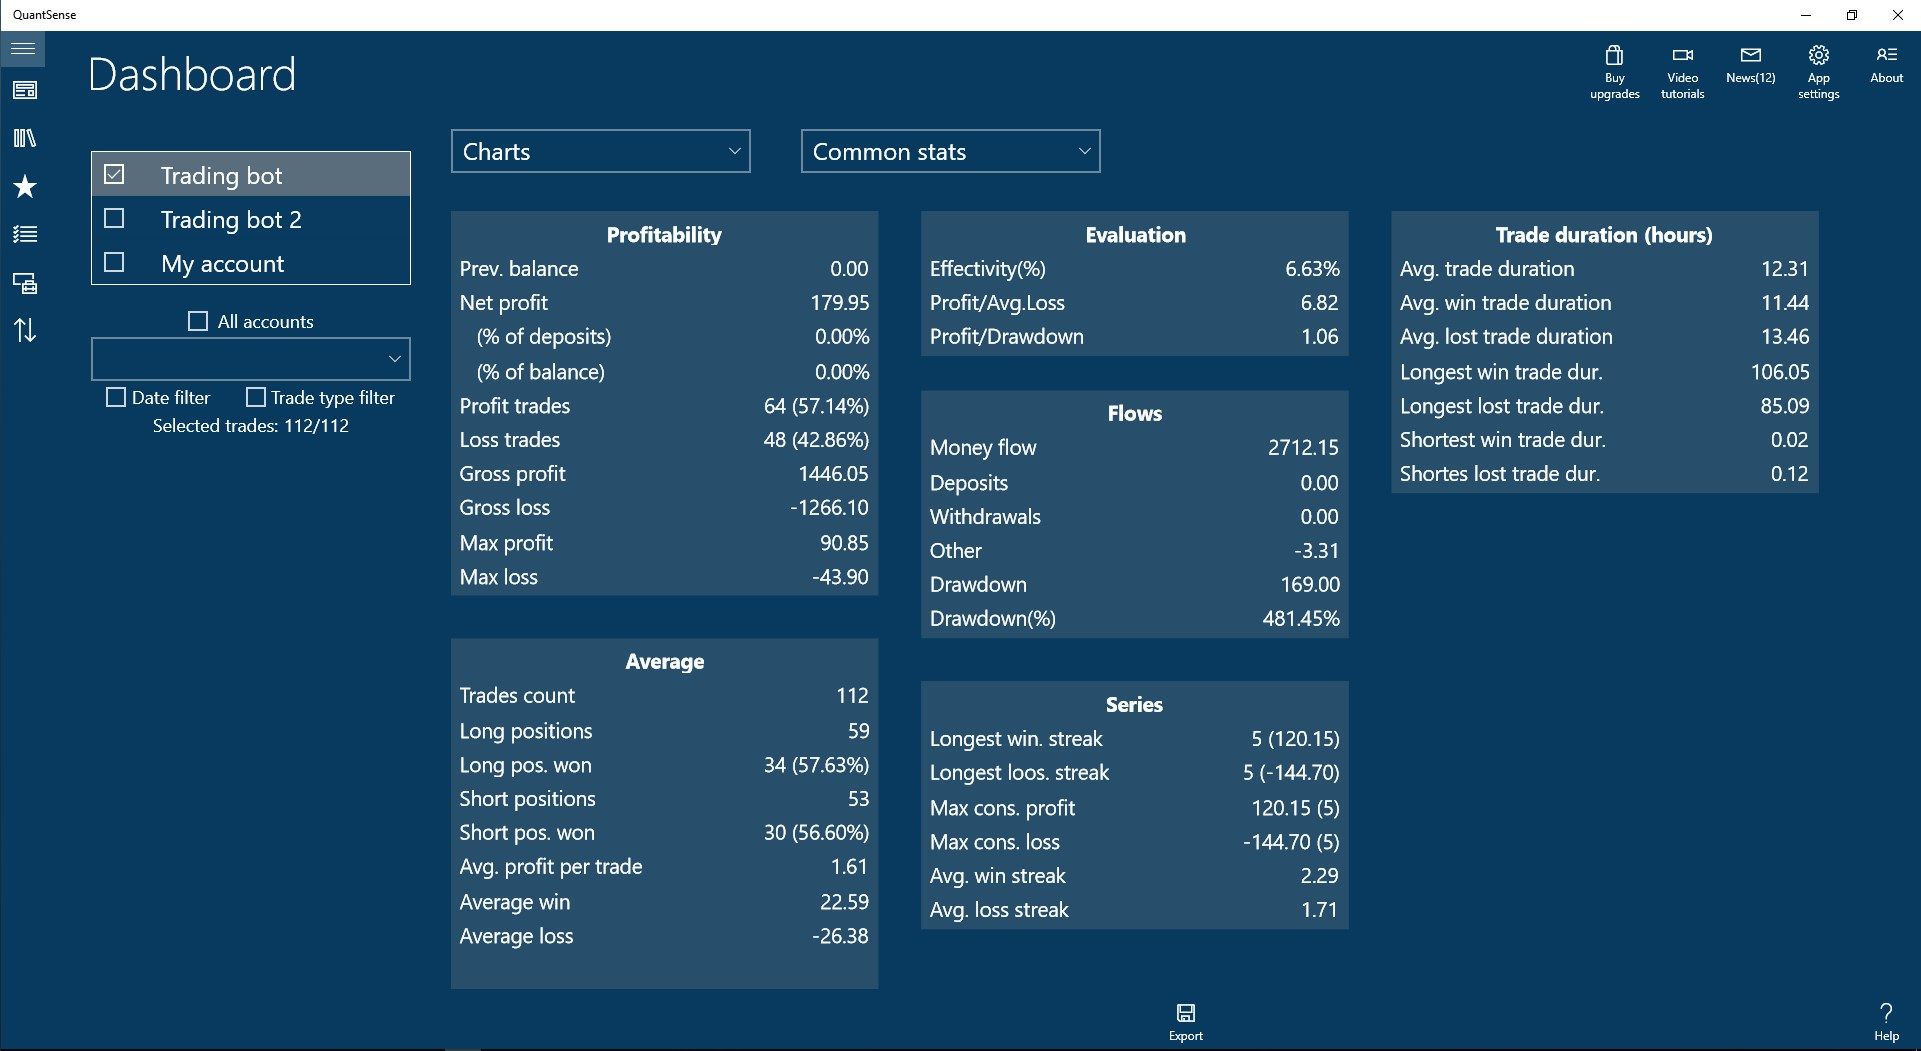 Dashborad showing statistics for selected trades.